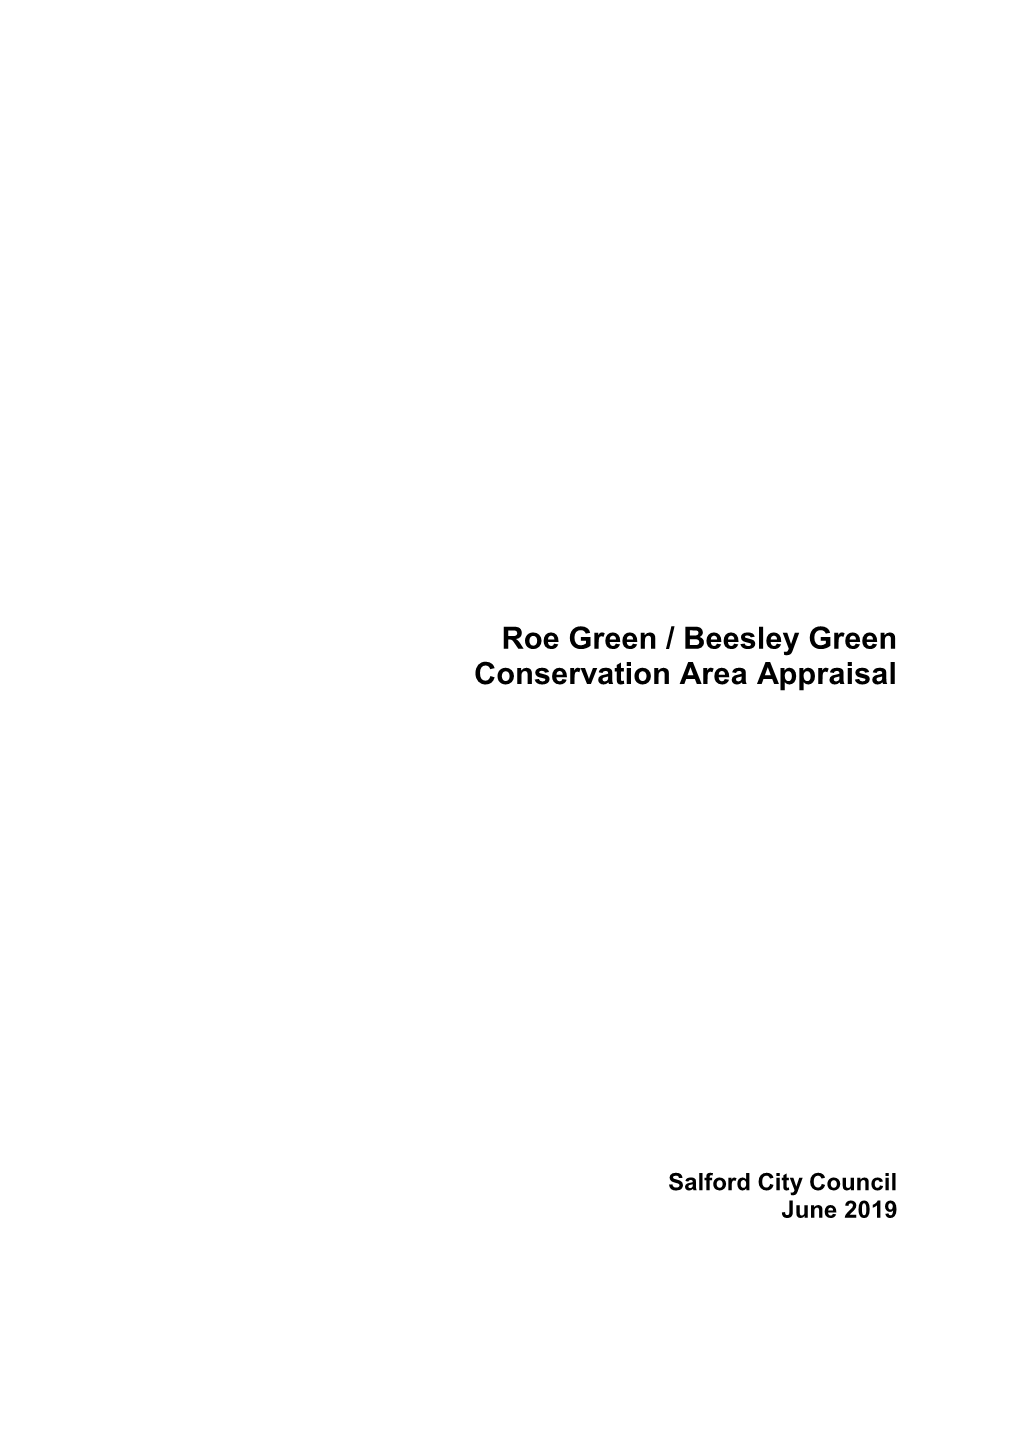 Roe Green / Beesley Green Conservation Area Appraisal